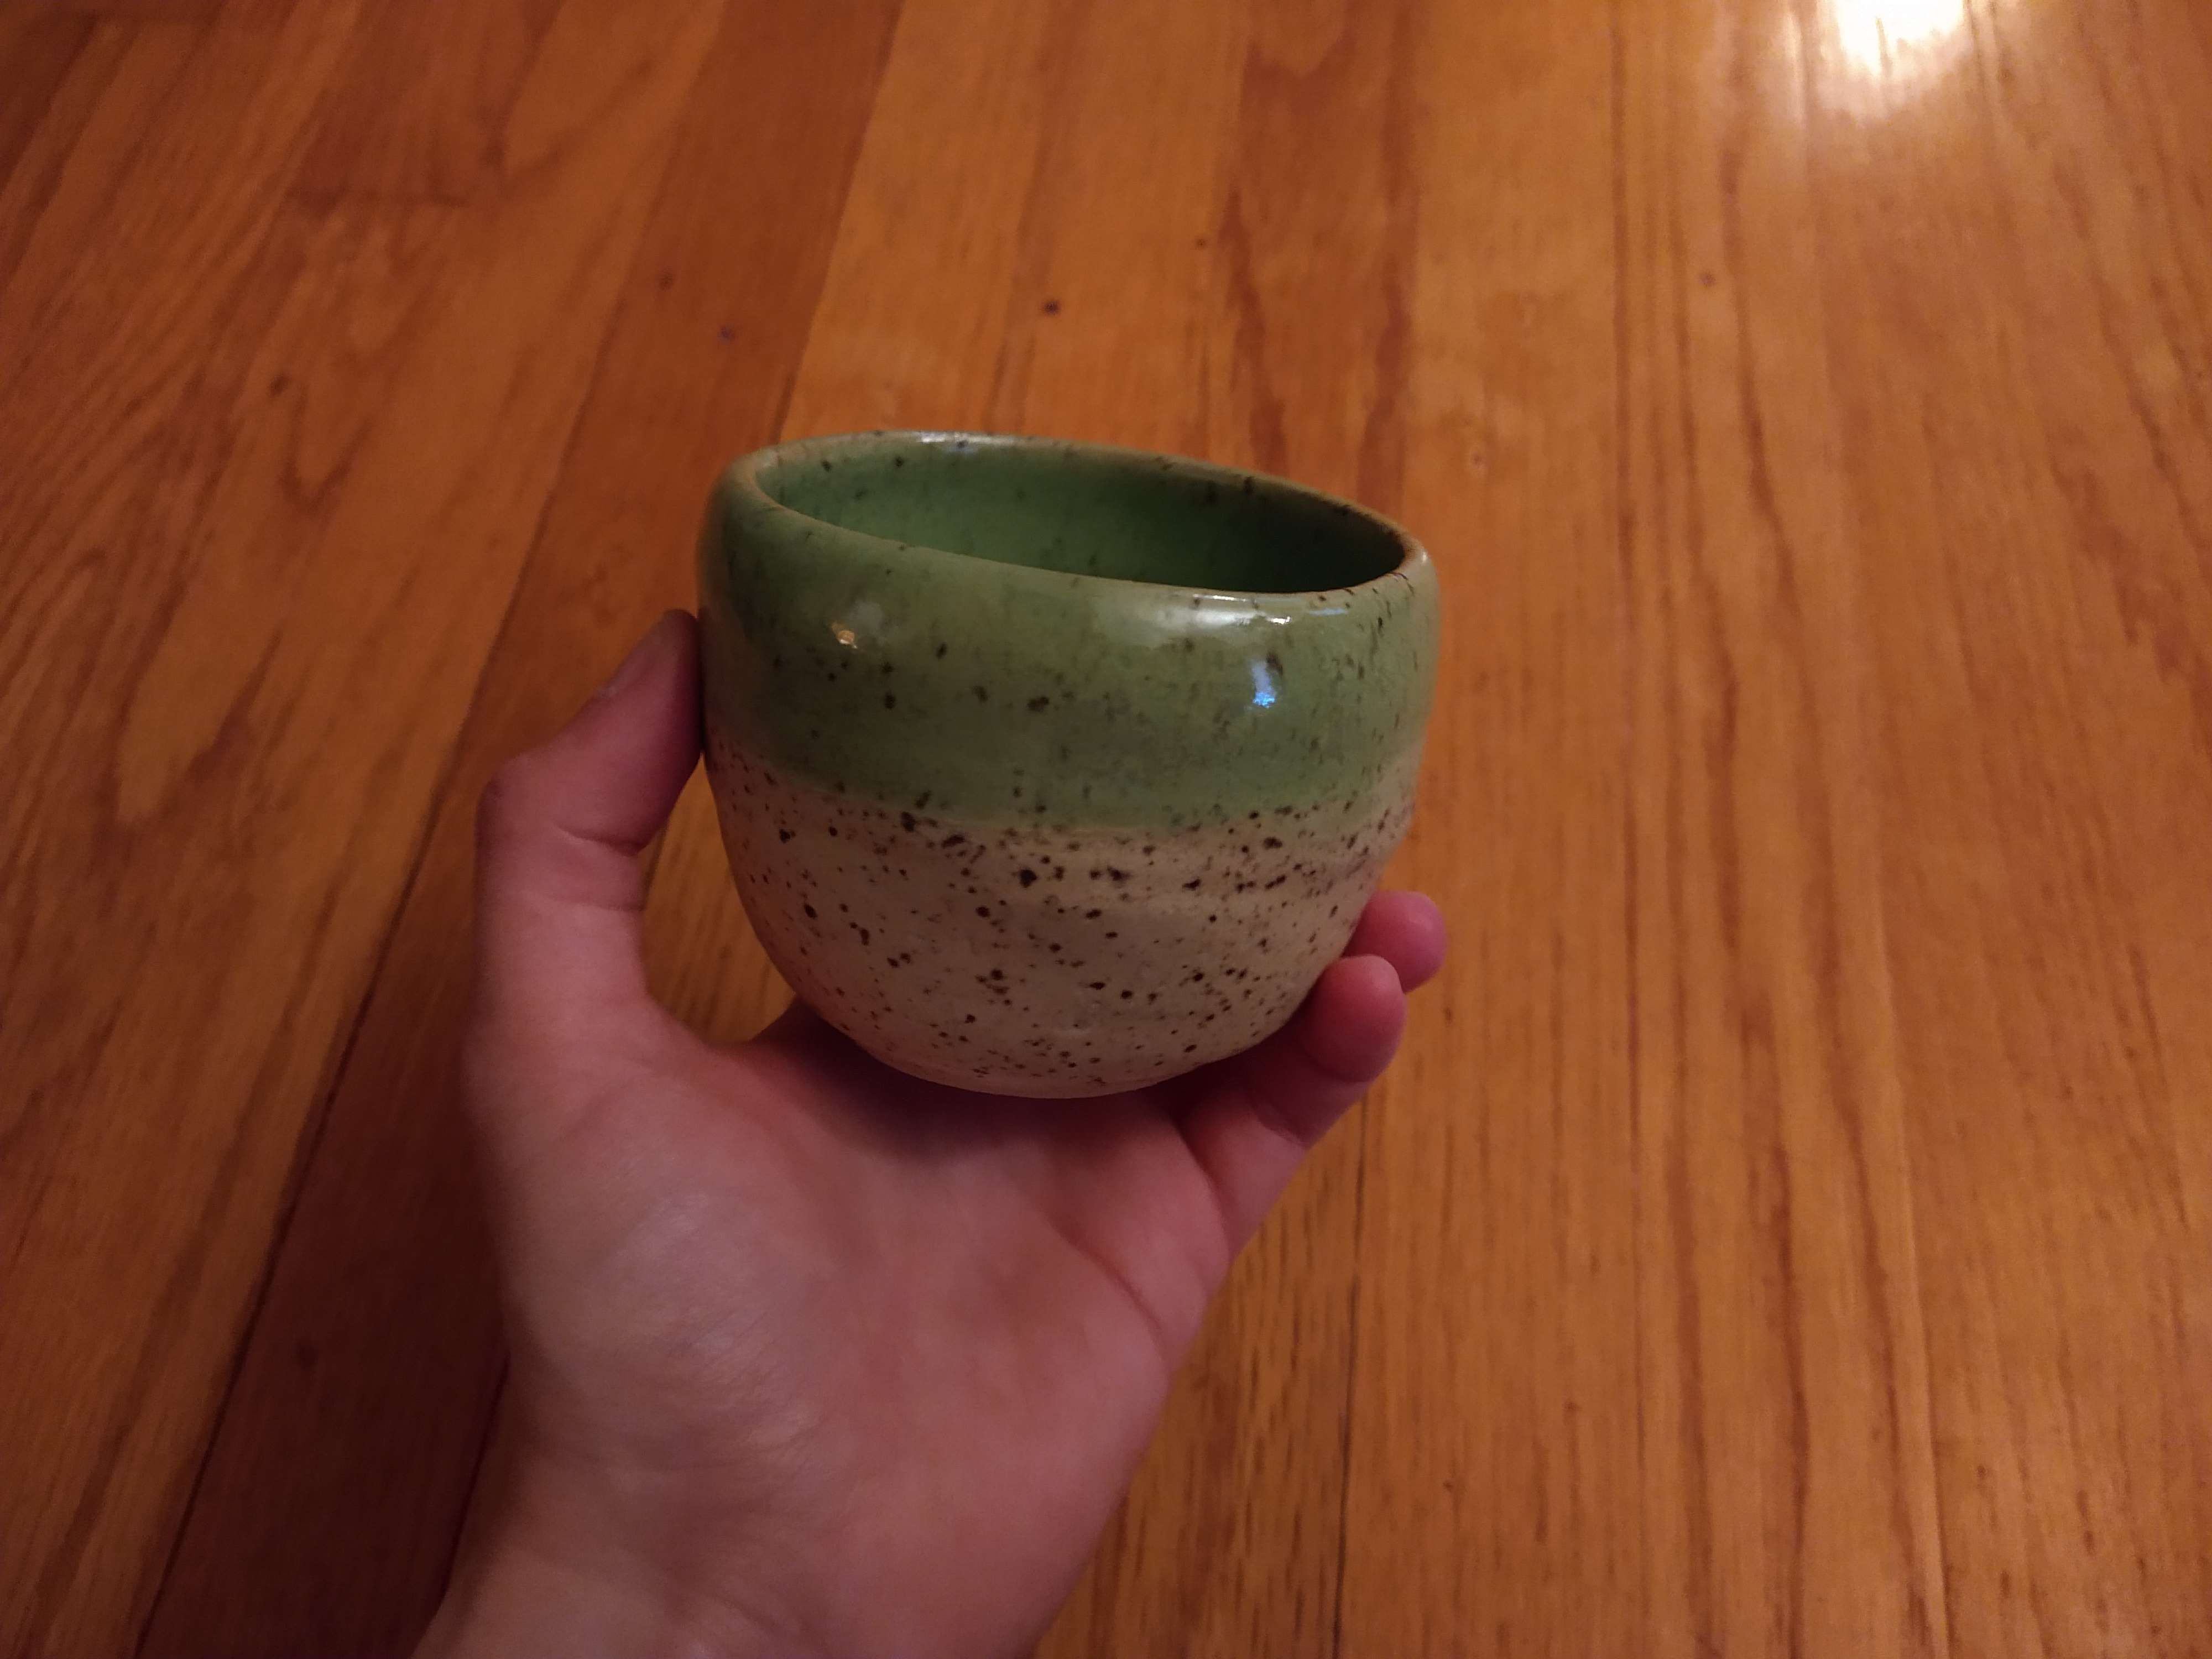 A green and white cup.